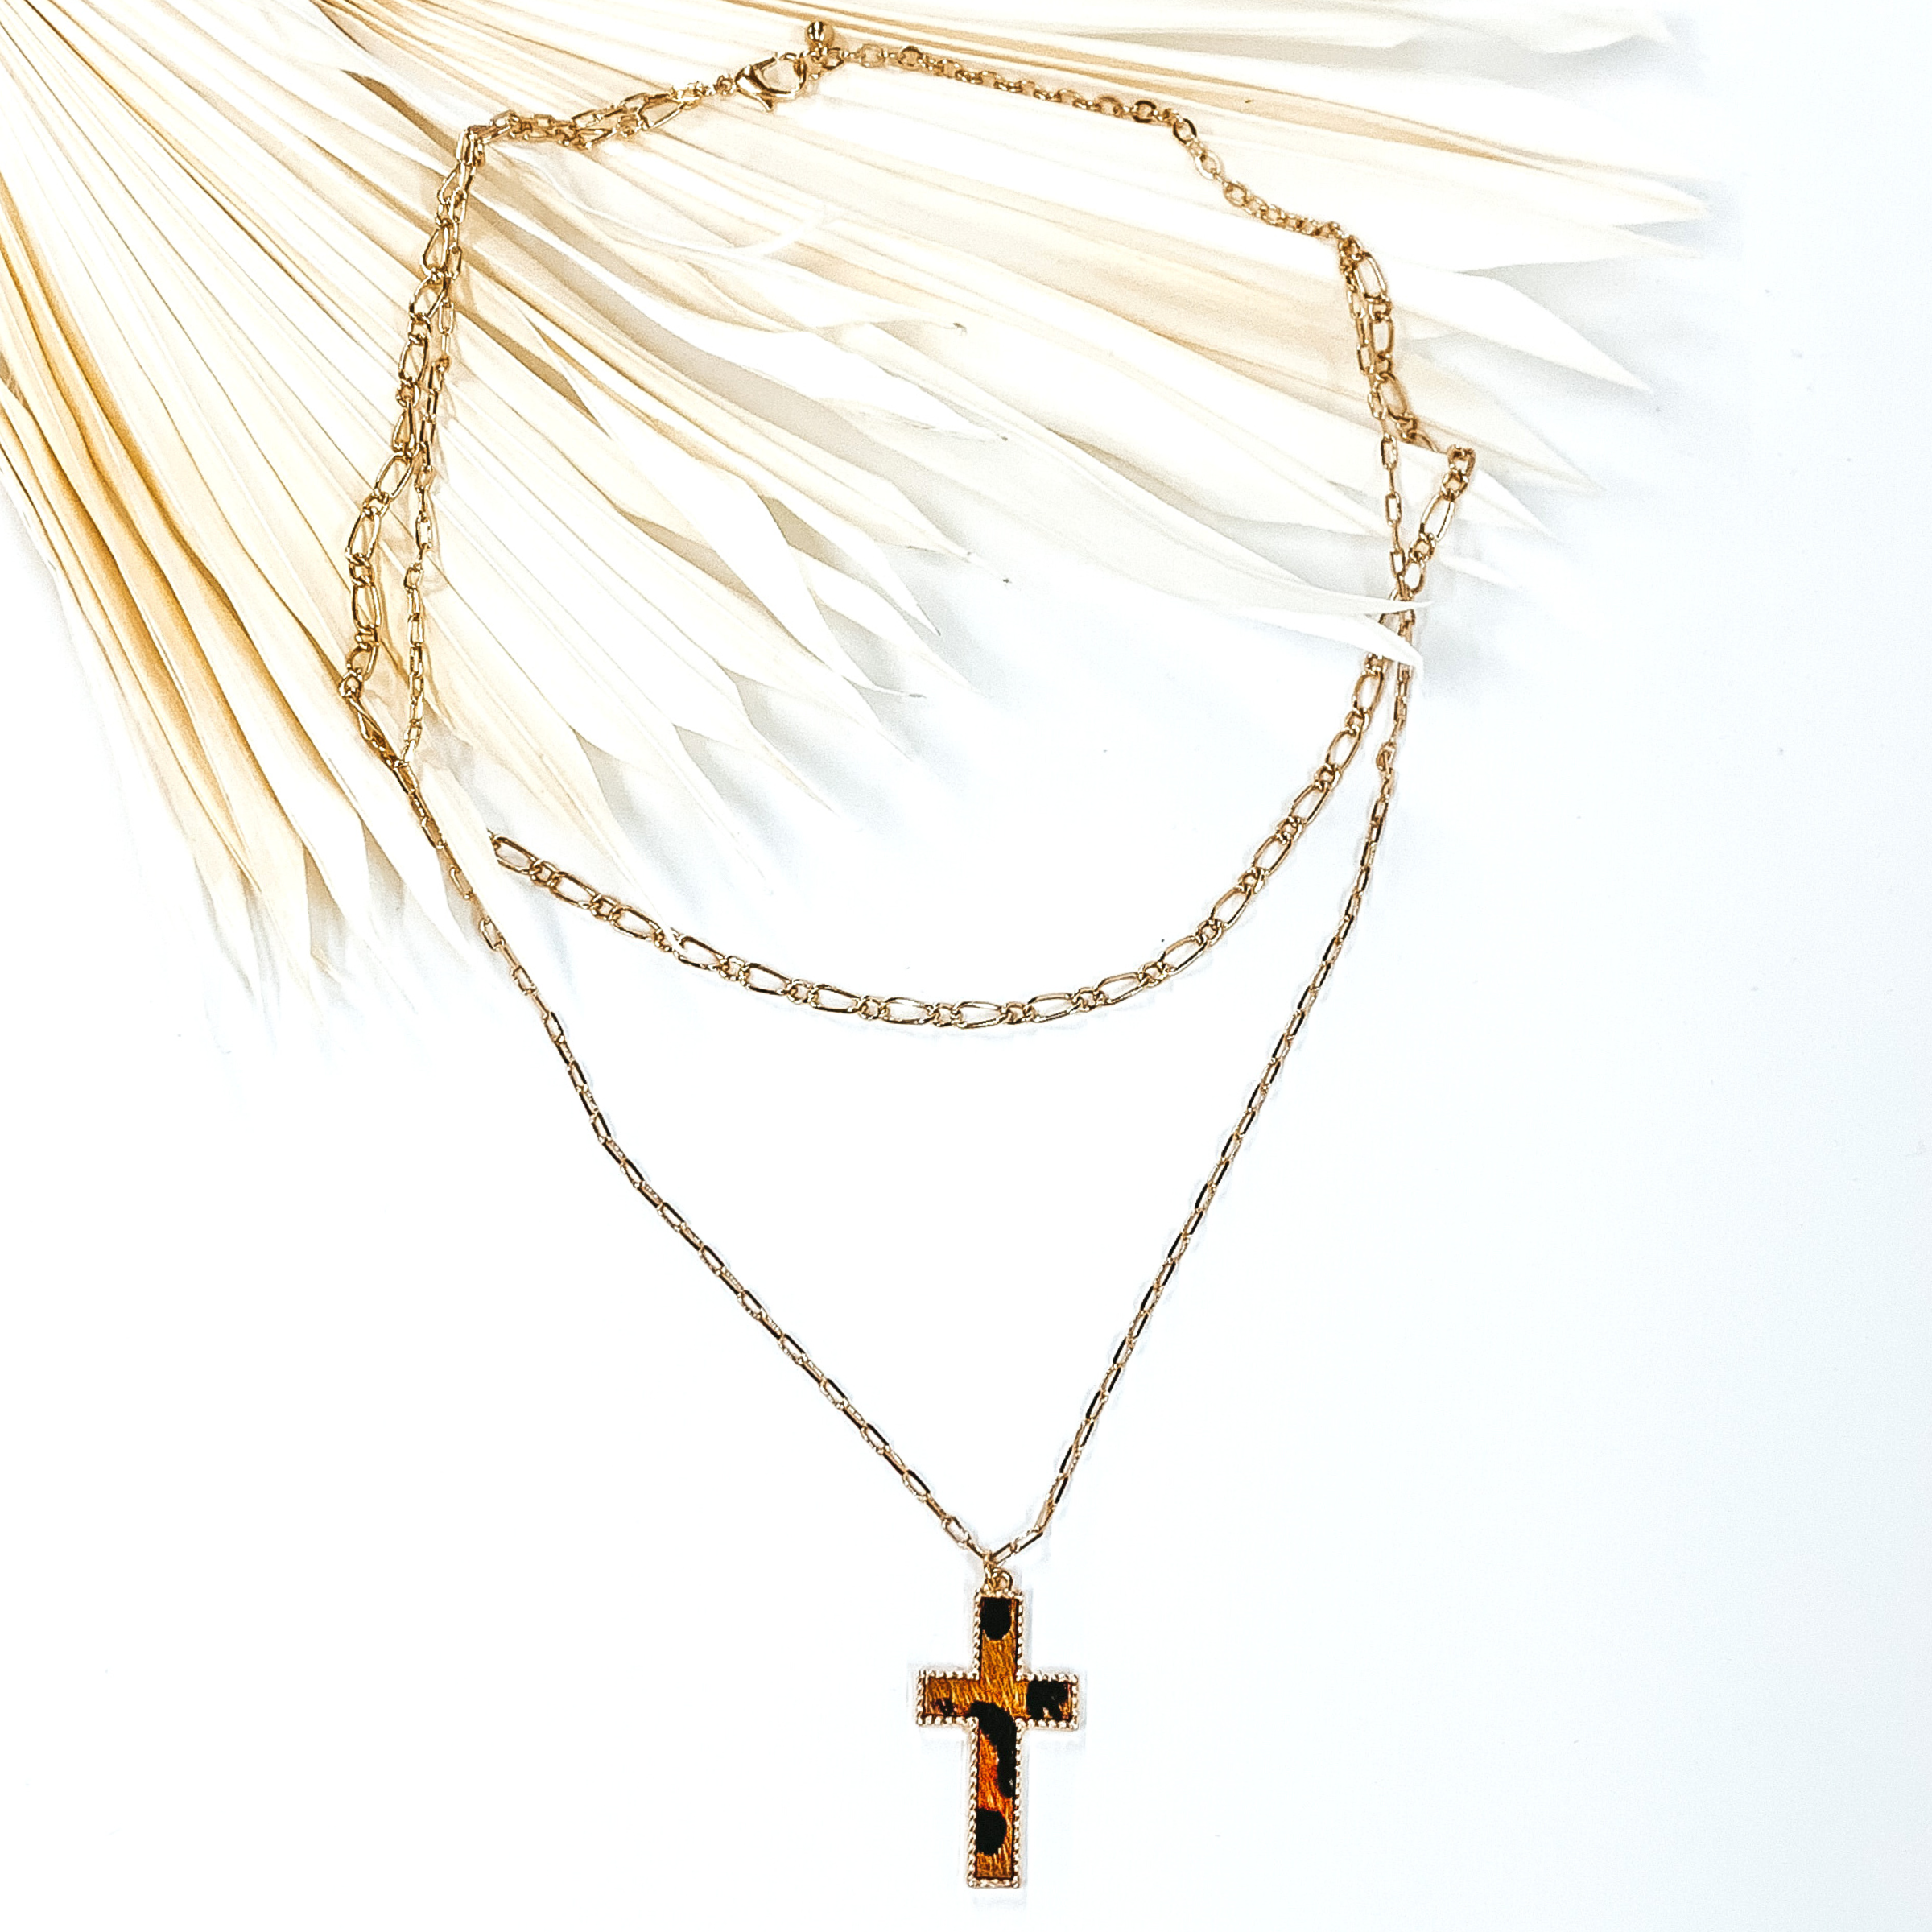 Gold paperclip doubled chain with a cross pendant. The pendant has a brown hide inlay with an animal print. This necklace is pictured laying on cream leaf on a white background.